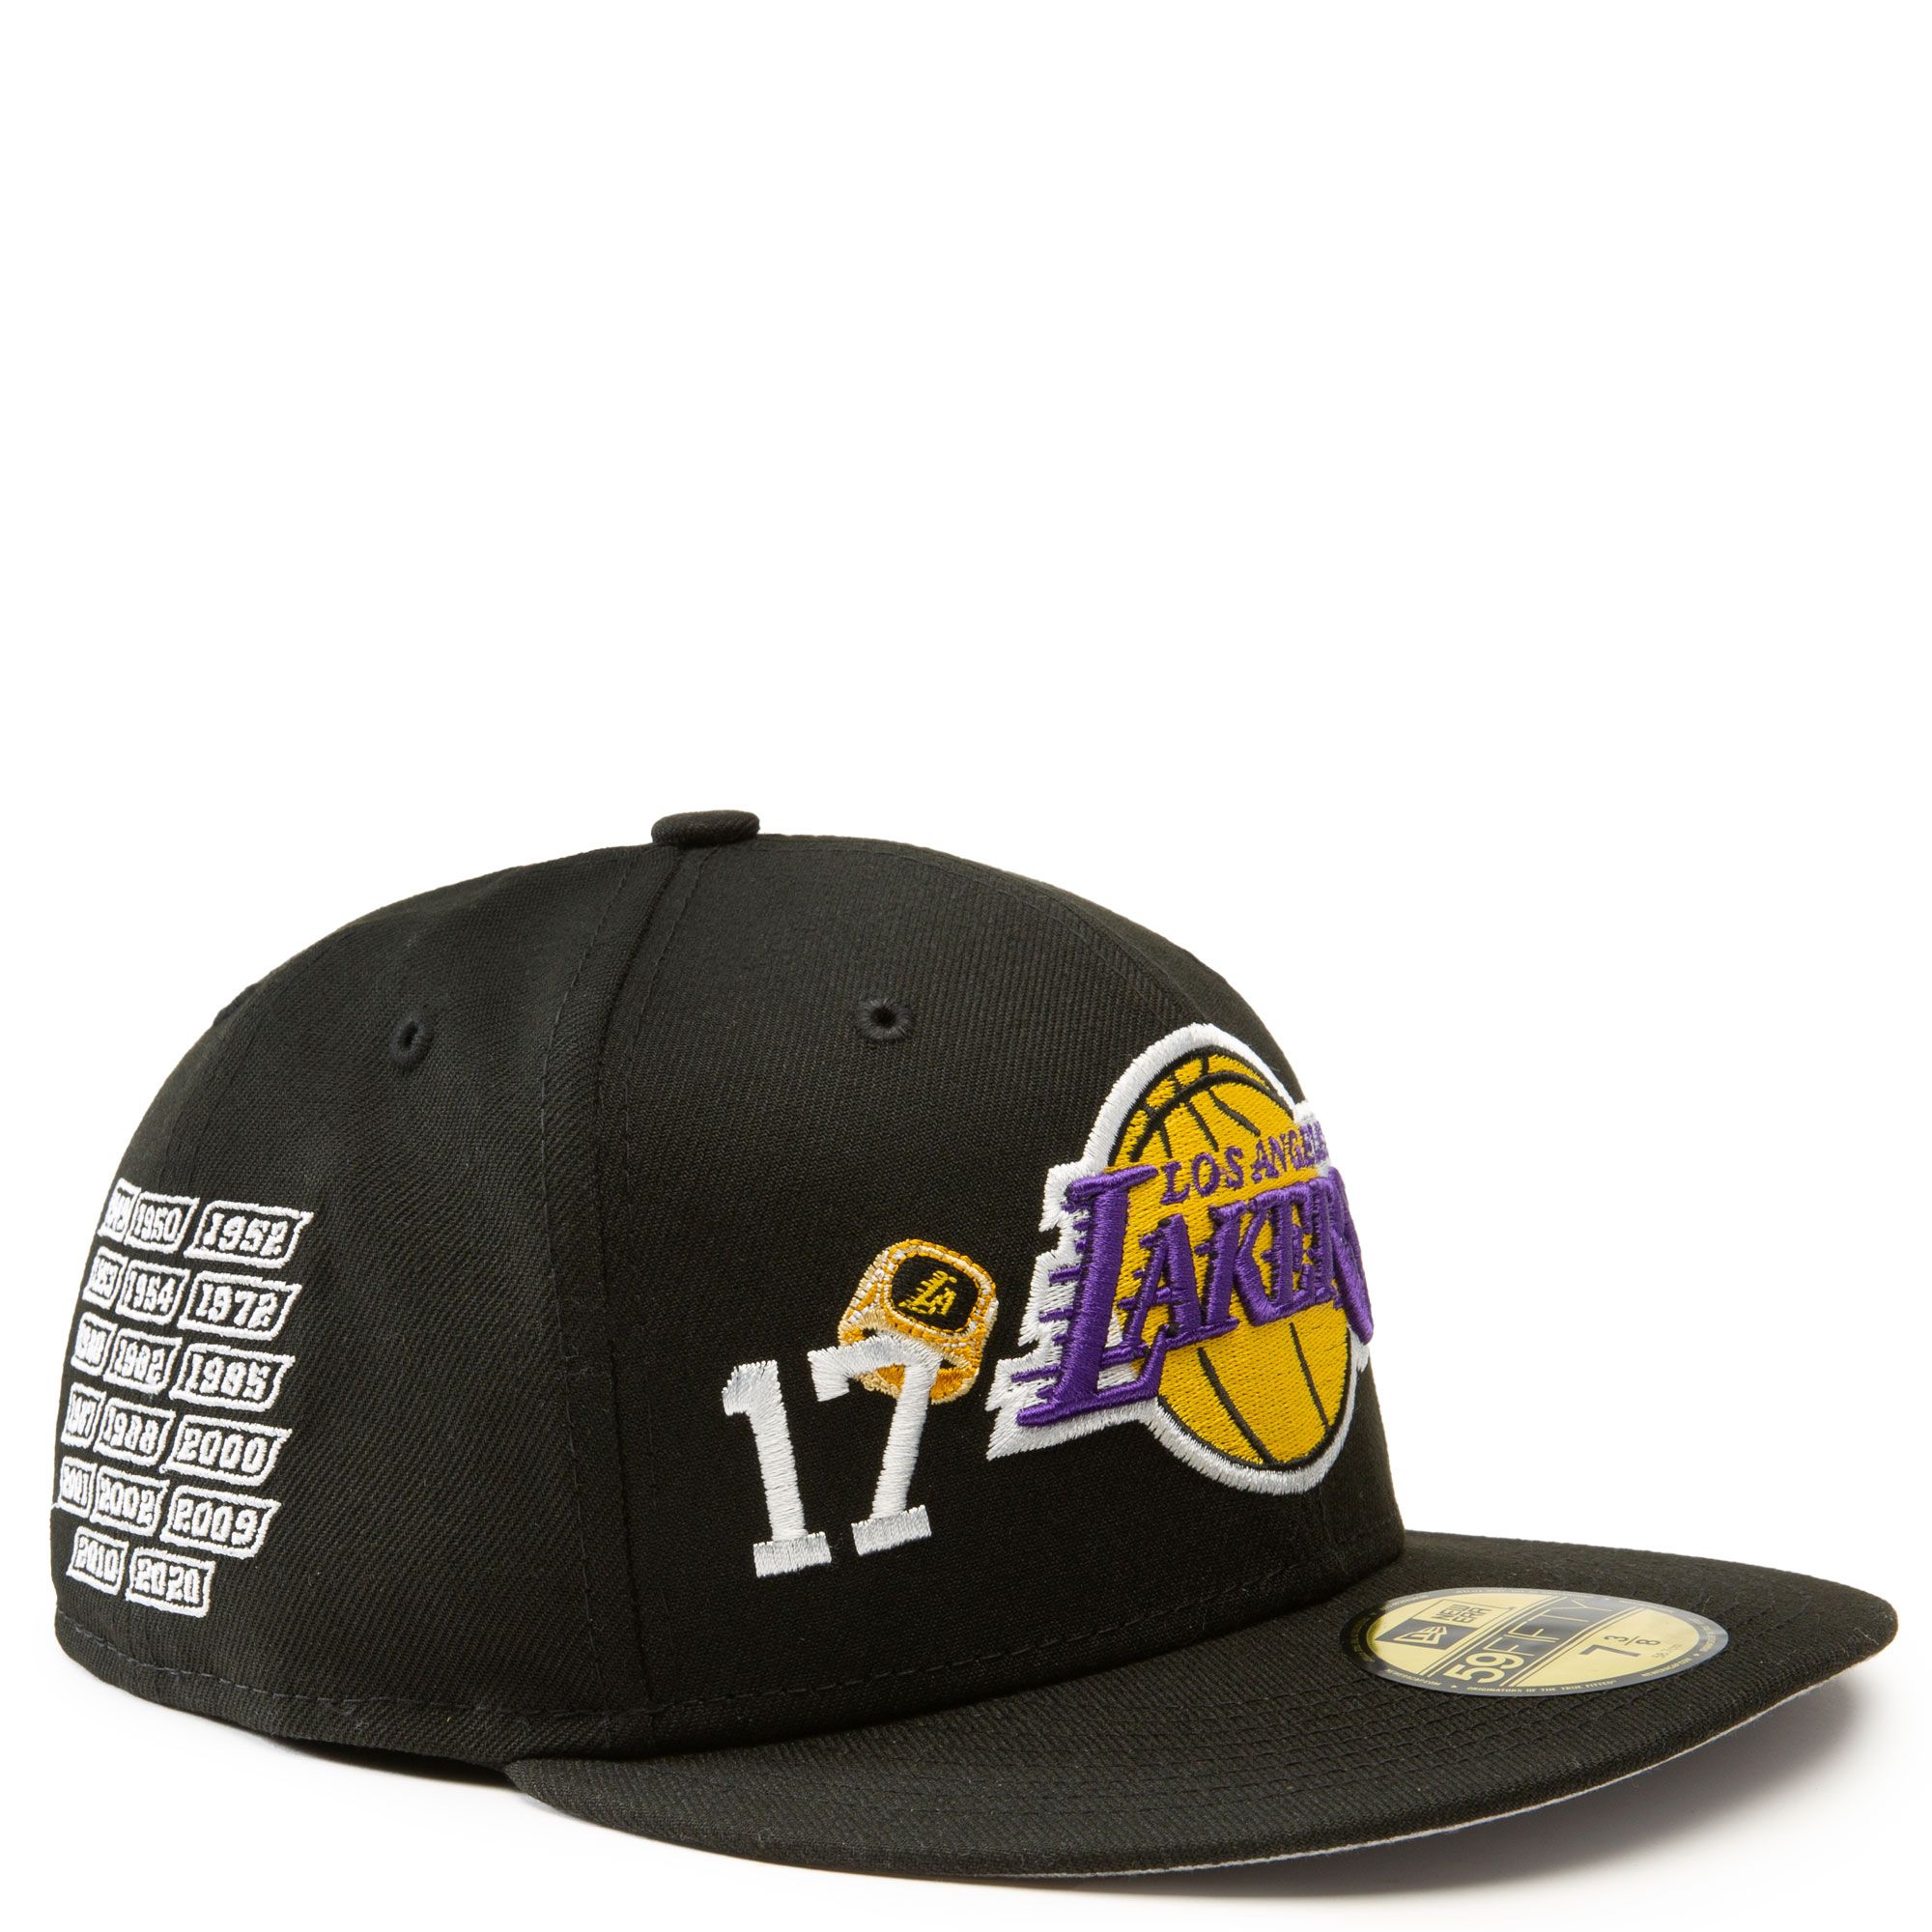 New Era 59FIFTY Los Angeles Lakers 17X Pink Bottom Men's Hat Black 70602113 - Pink - Cotton Blend - 7 5/8